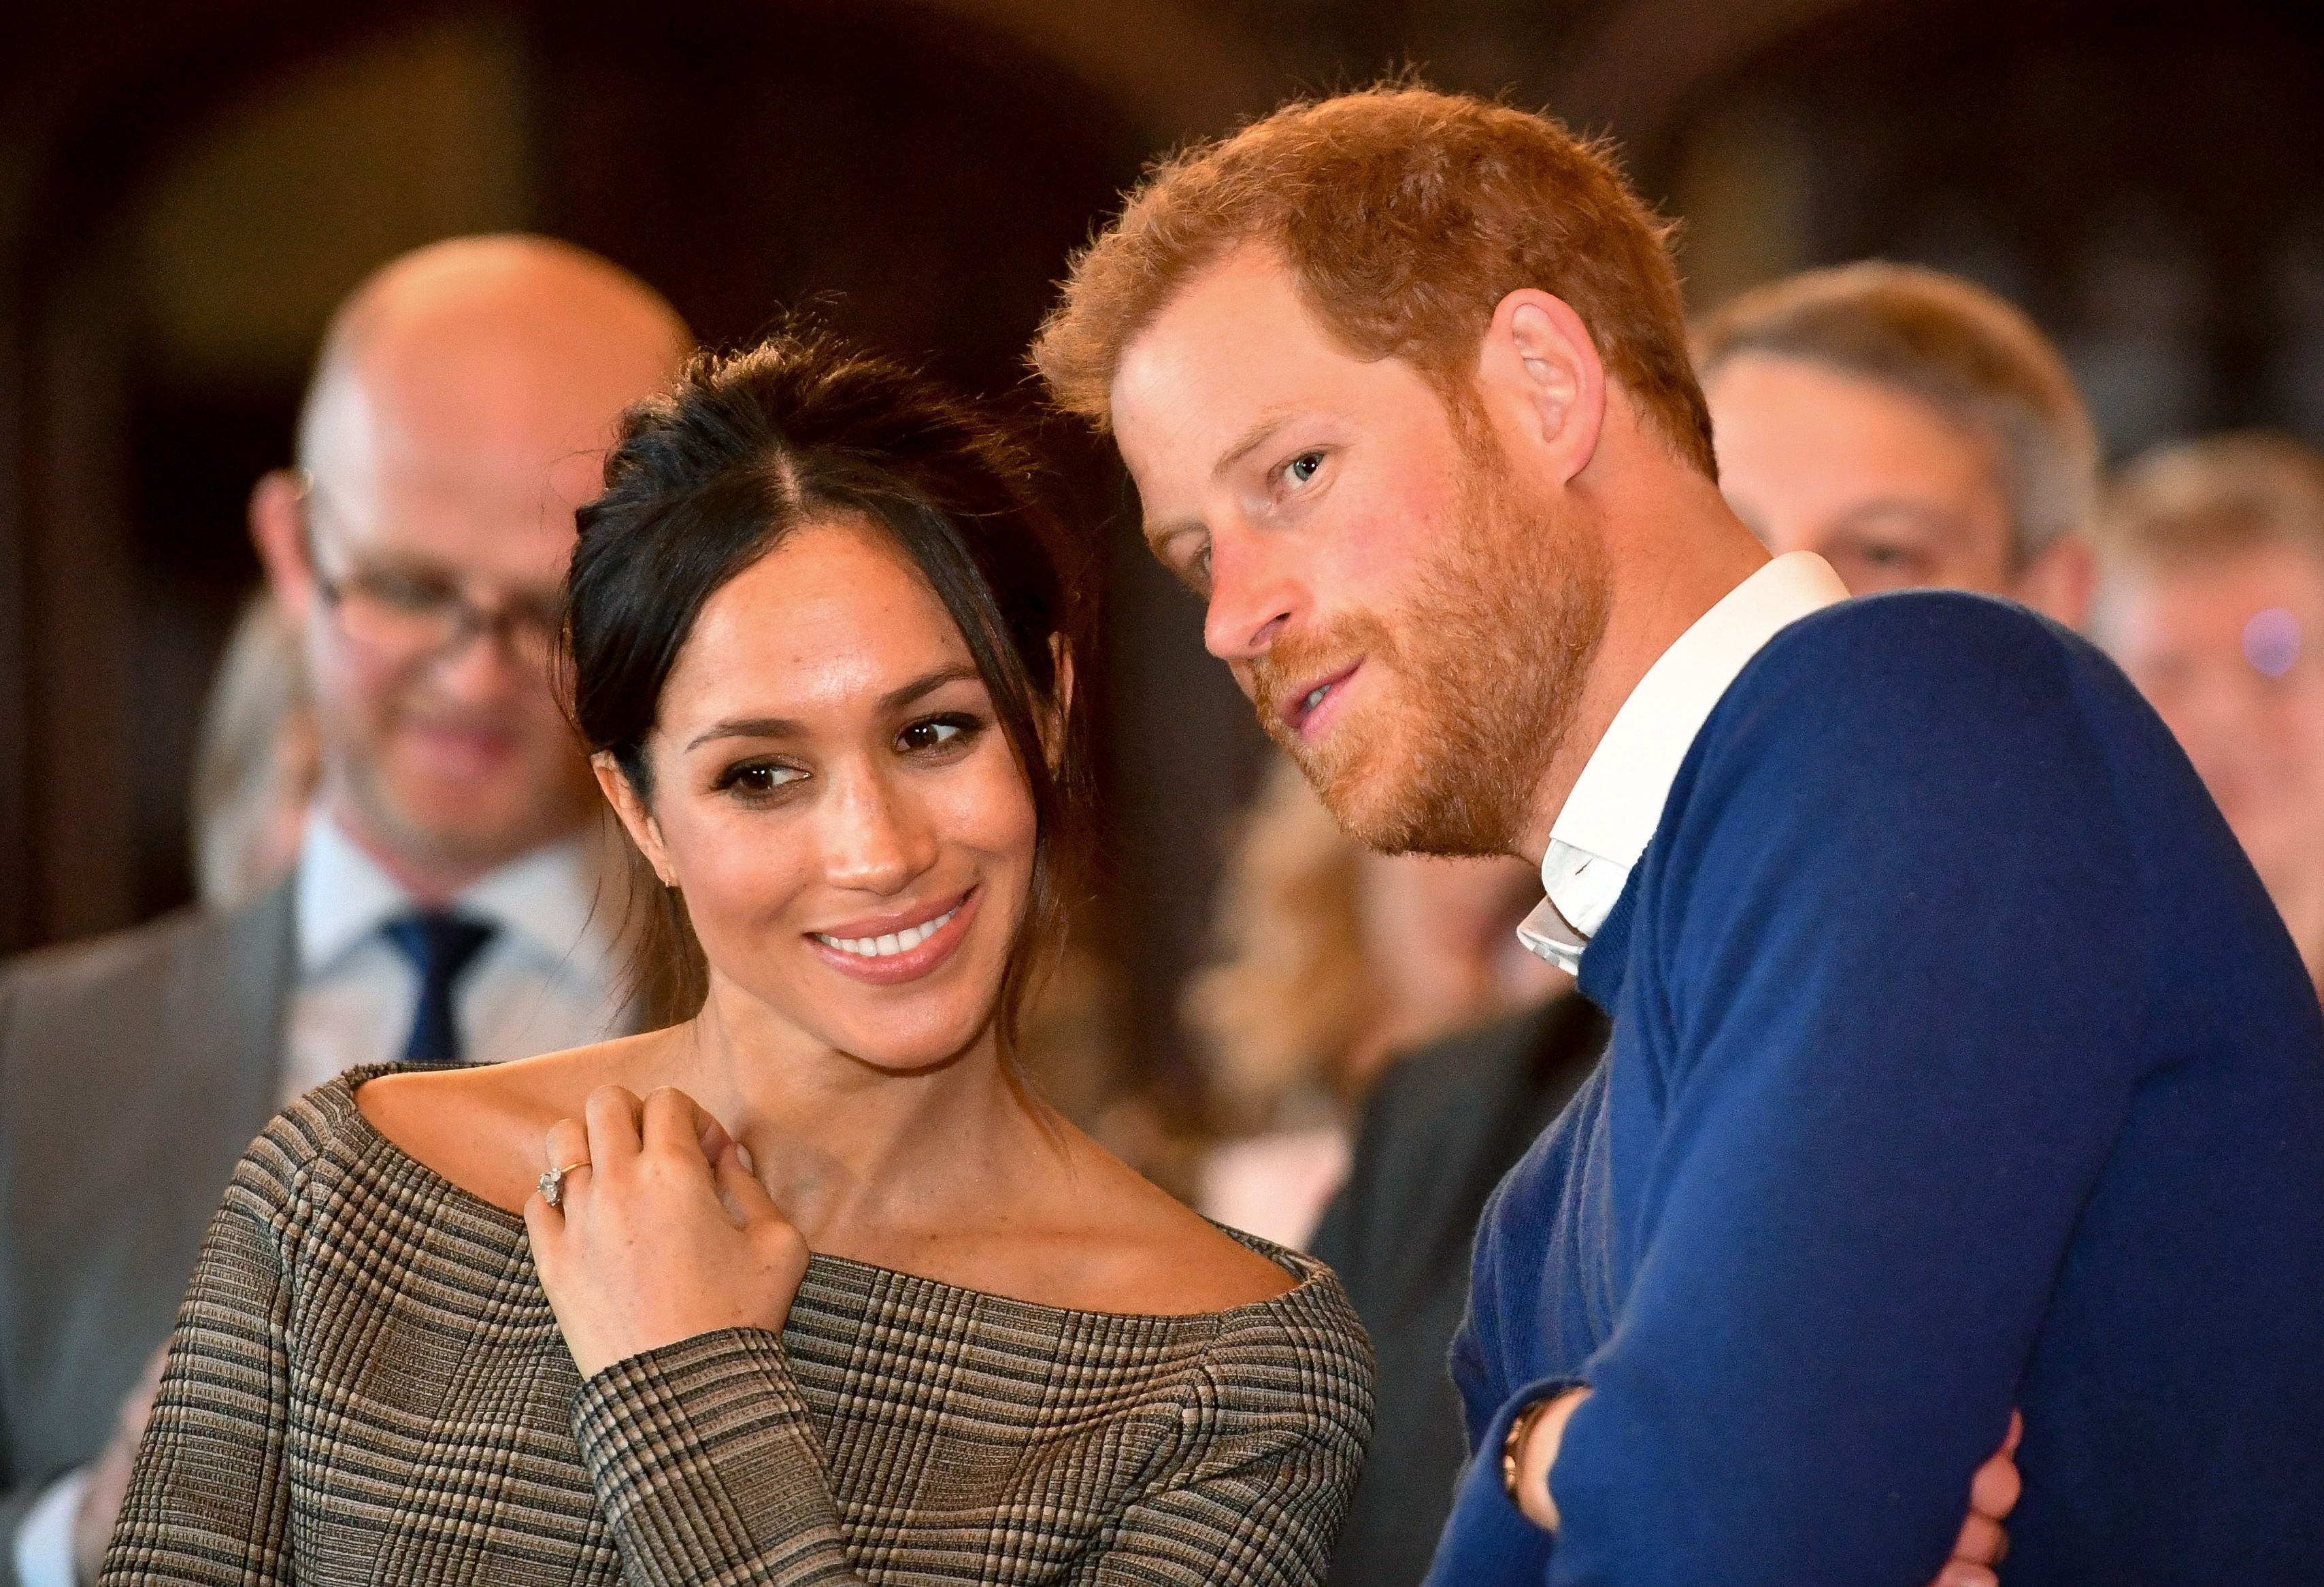 prince harry whispers to meghan markle as they watch a news photo 906665892 1564735753 Lorie